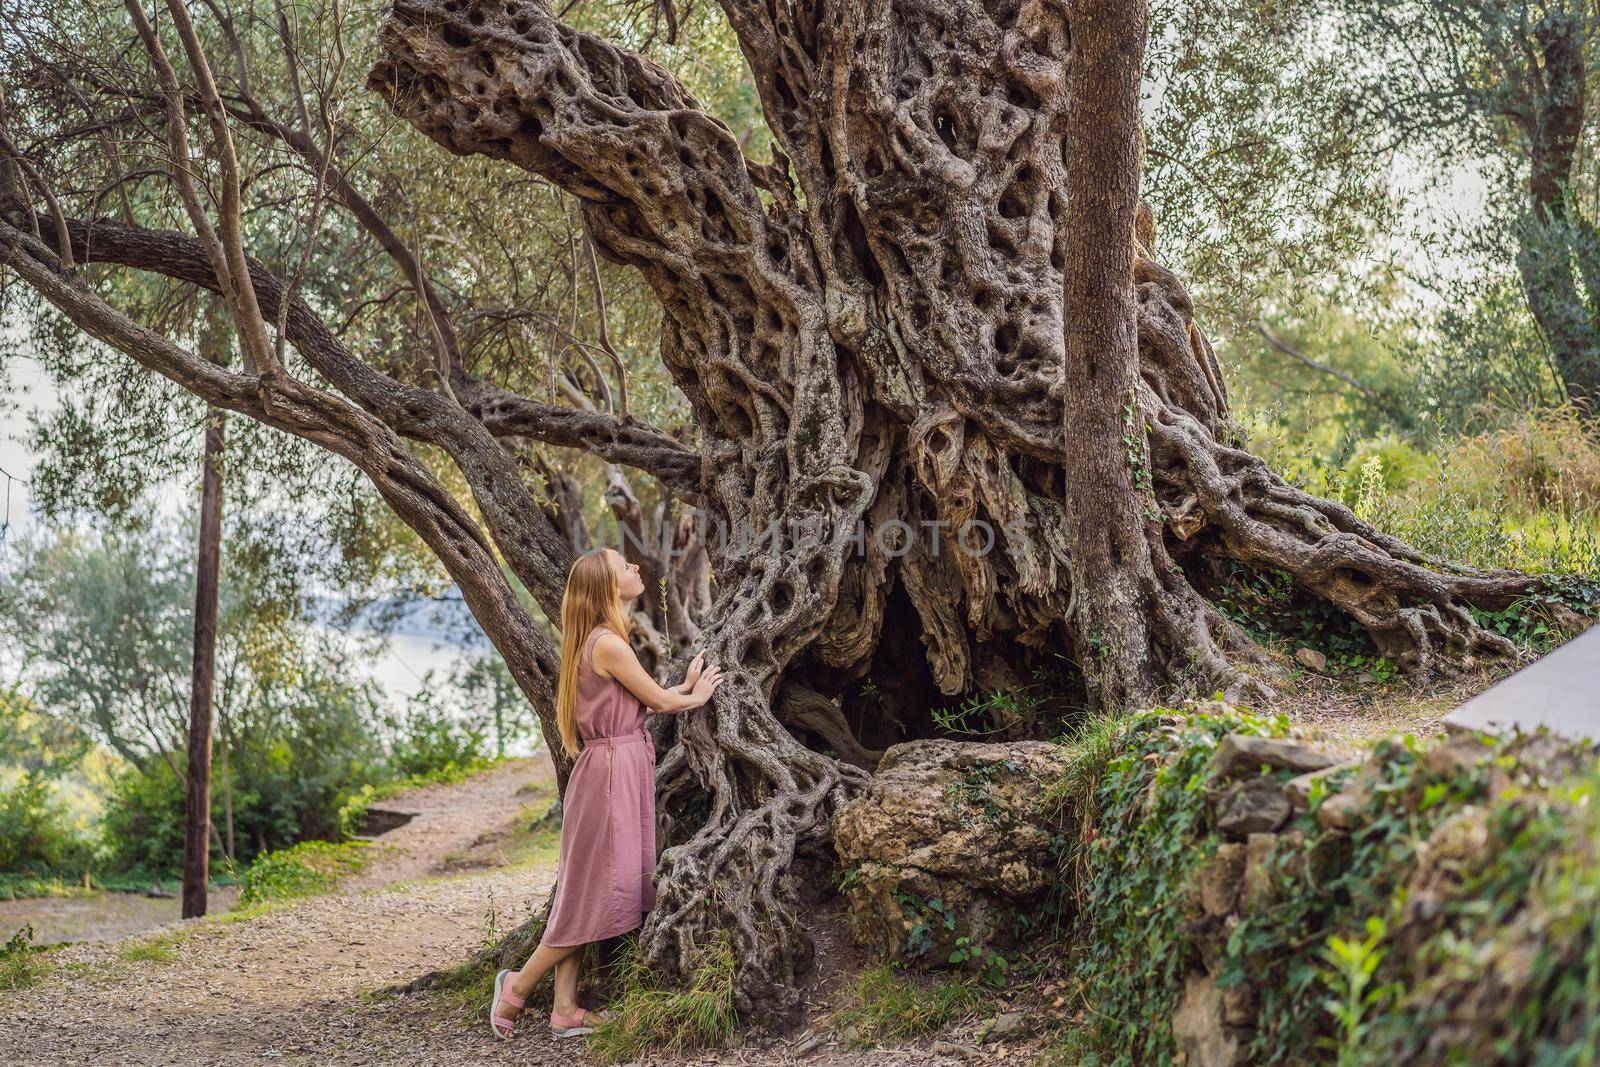 woman tourist looking at 2000 years old olive tree: Stara Maslina in Budva, Montenegro. It is thought to be the oldest tree in Europe and is a tourist attraction. In the background the montenegrin mountains. Europe by galitskaya